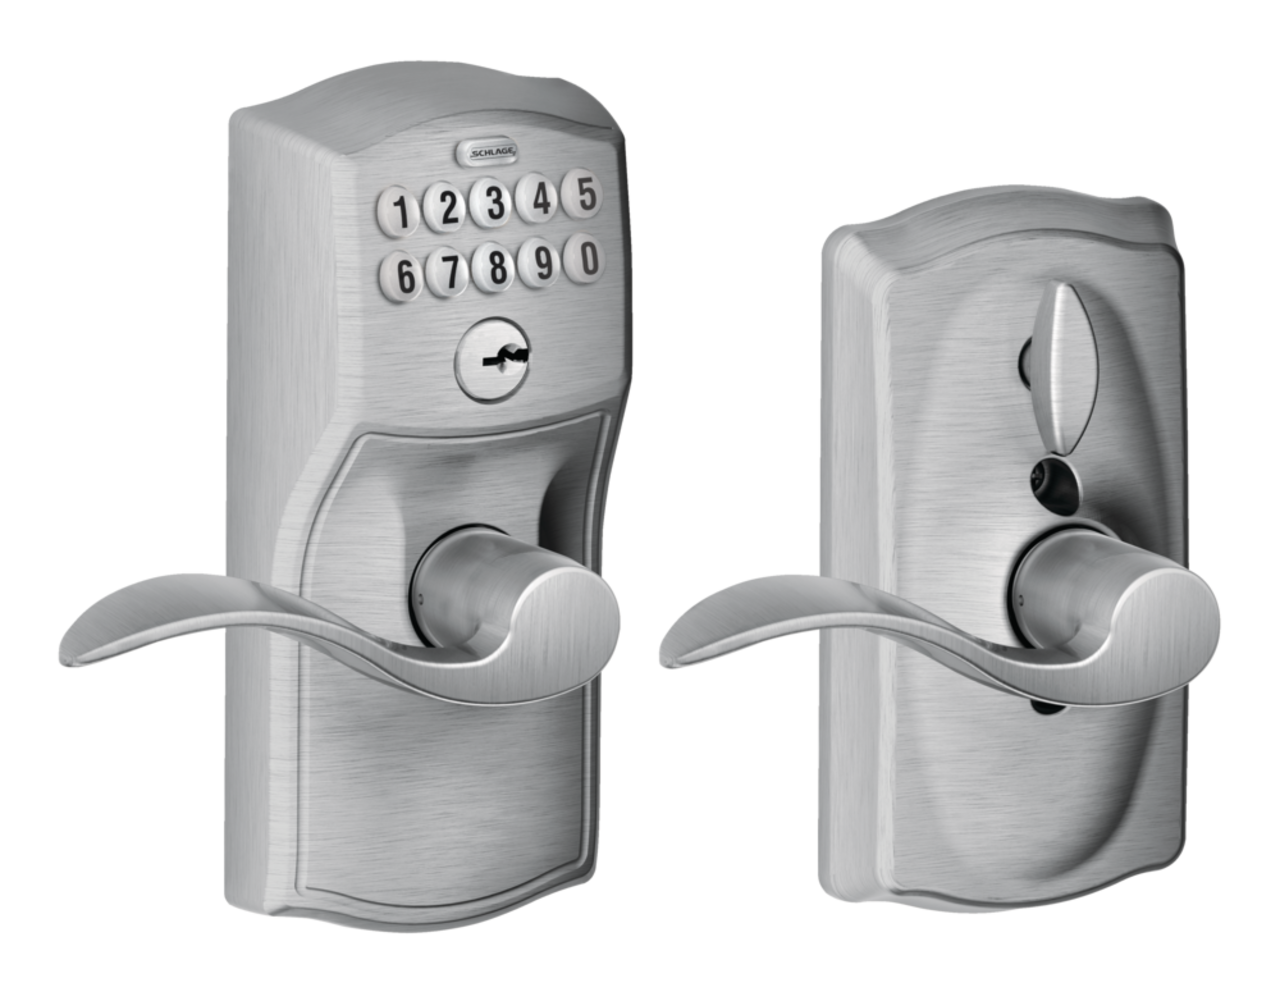 https://media-www.canadiantire.ca/product/fixing/hardware/curb-appeal/0462827/schlage-keypad-lock-with-accent-lever-satin-nickel-7c9f823a-248e-4bc3-b8aa-fa6ac88dd8de.png?imdensity=1&imwidth=640&impolicy=mZoom